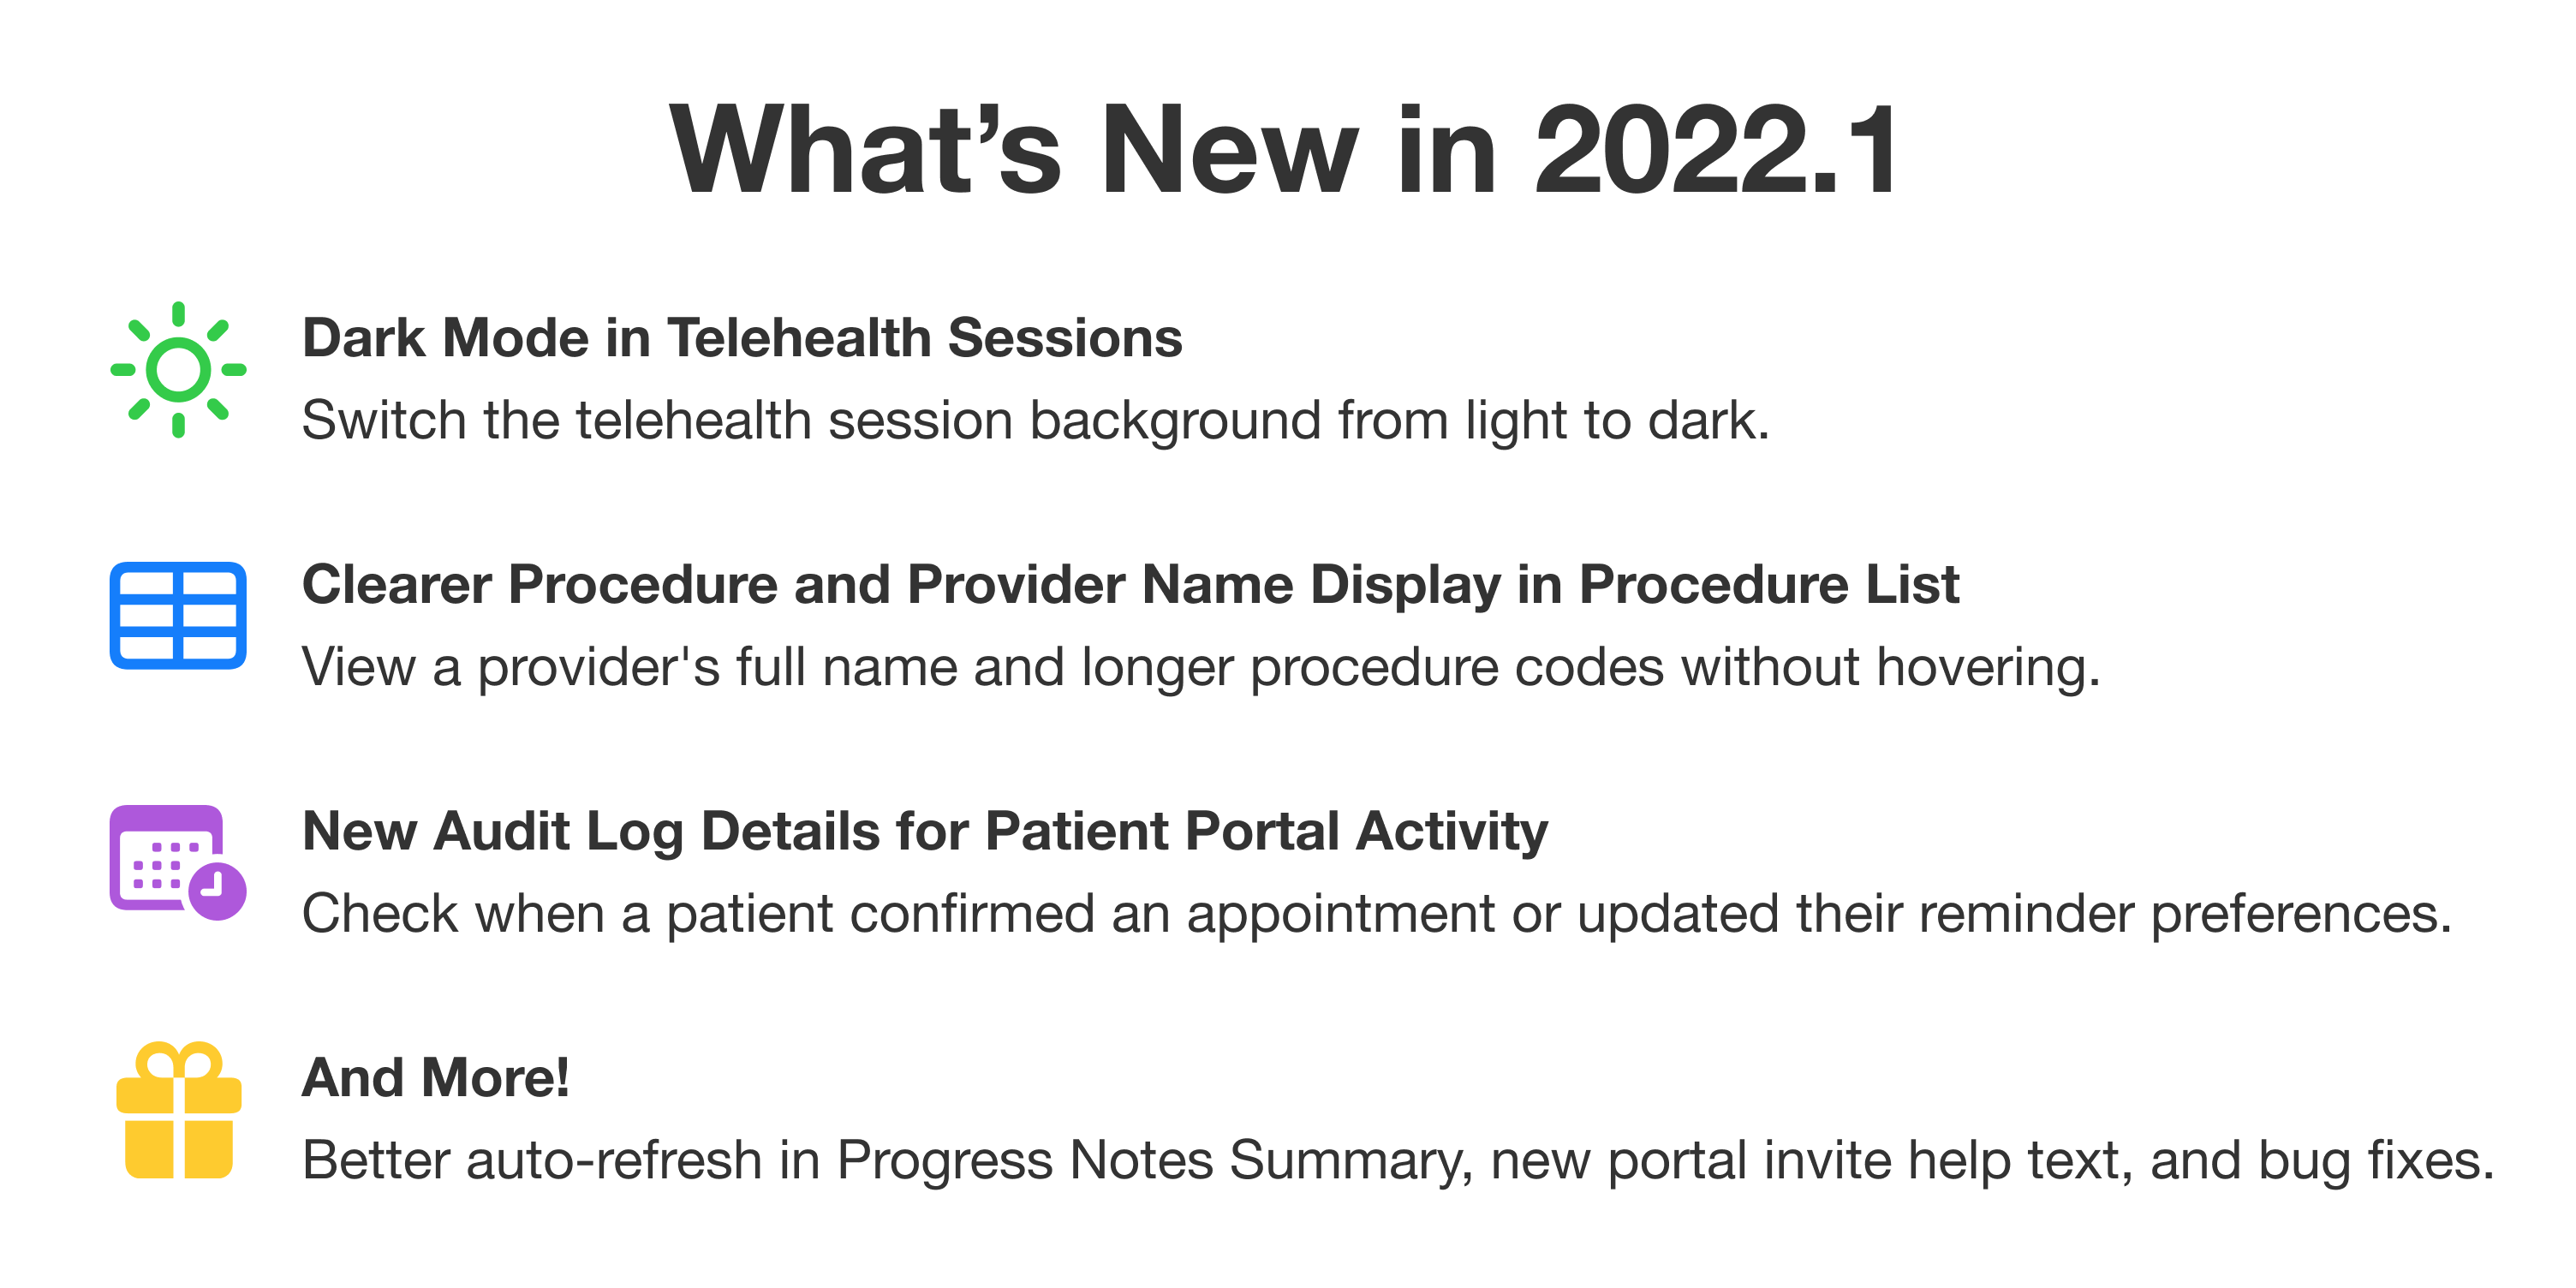 What's New in 2022.1. First: Dark Mode in Telehealth Sessions. Switch the telehealth session background from light to dark. Second: Clearer Procedure and Provider Name Display in Procedure List. View a provider's full name and longer procedure codes without hovering. Third: New Audit Log Details for Patient Portal Activity. Check when a patient confirmed an appointment or updated their appointment reminder preferences. And More! Better auto-refresh in Progress Notes Summary, new portal invite help text, and bug fixes.